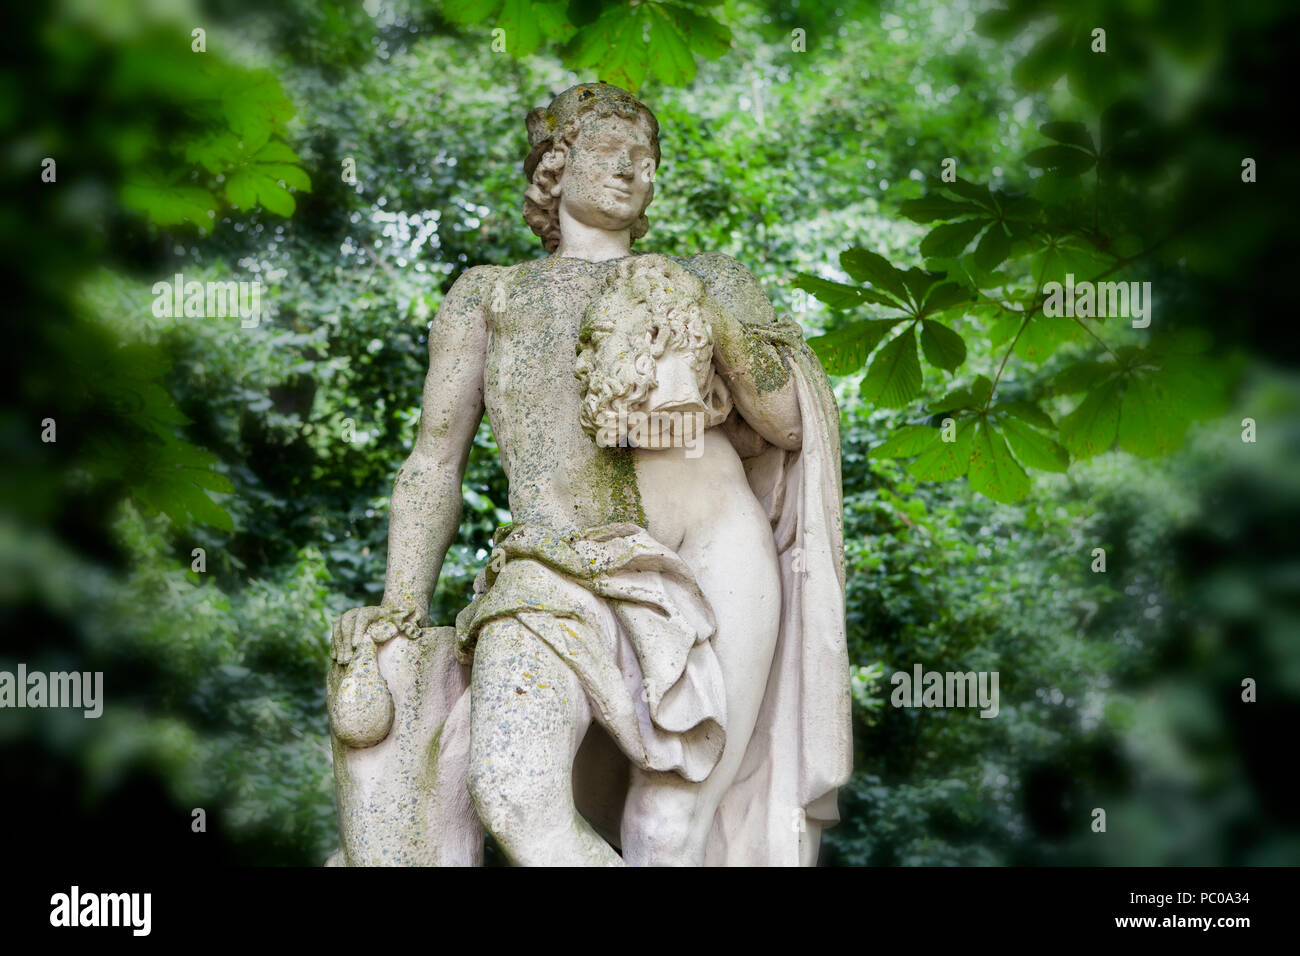 Statue of Mercury or Hermes at Nordkirchen Moated Palace, Germany Stock Photo